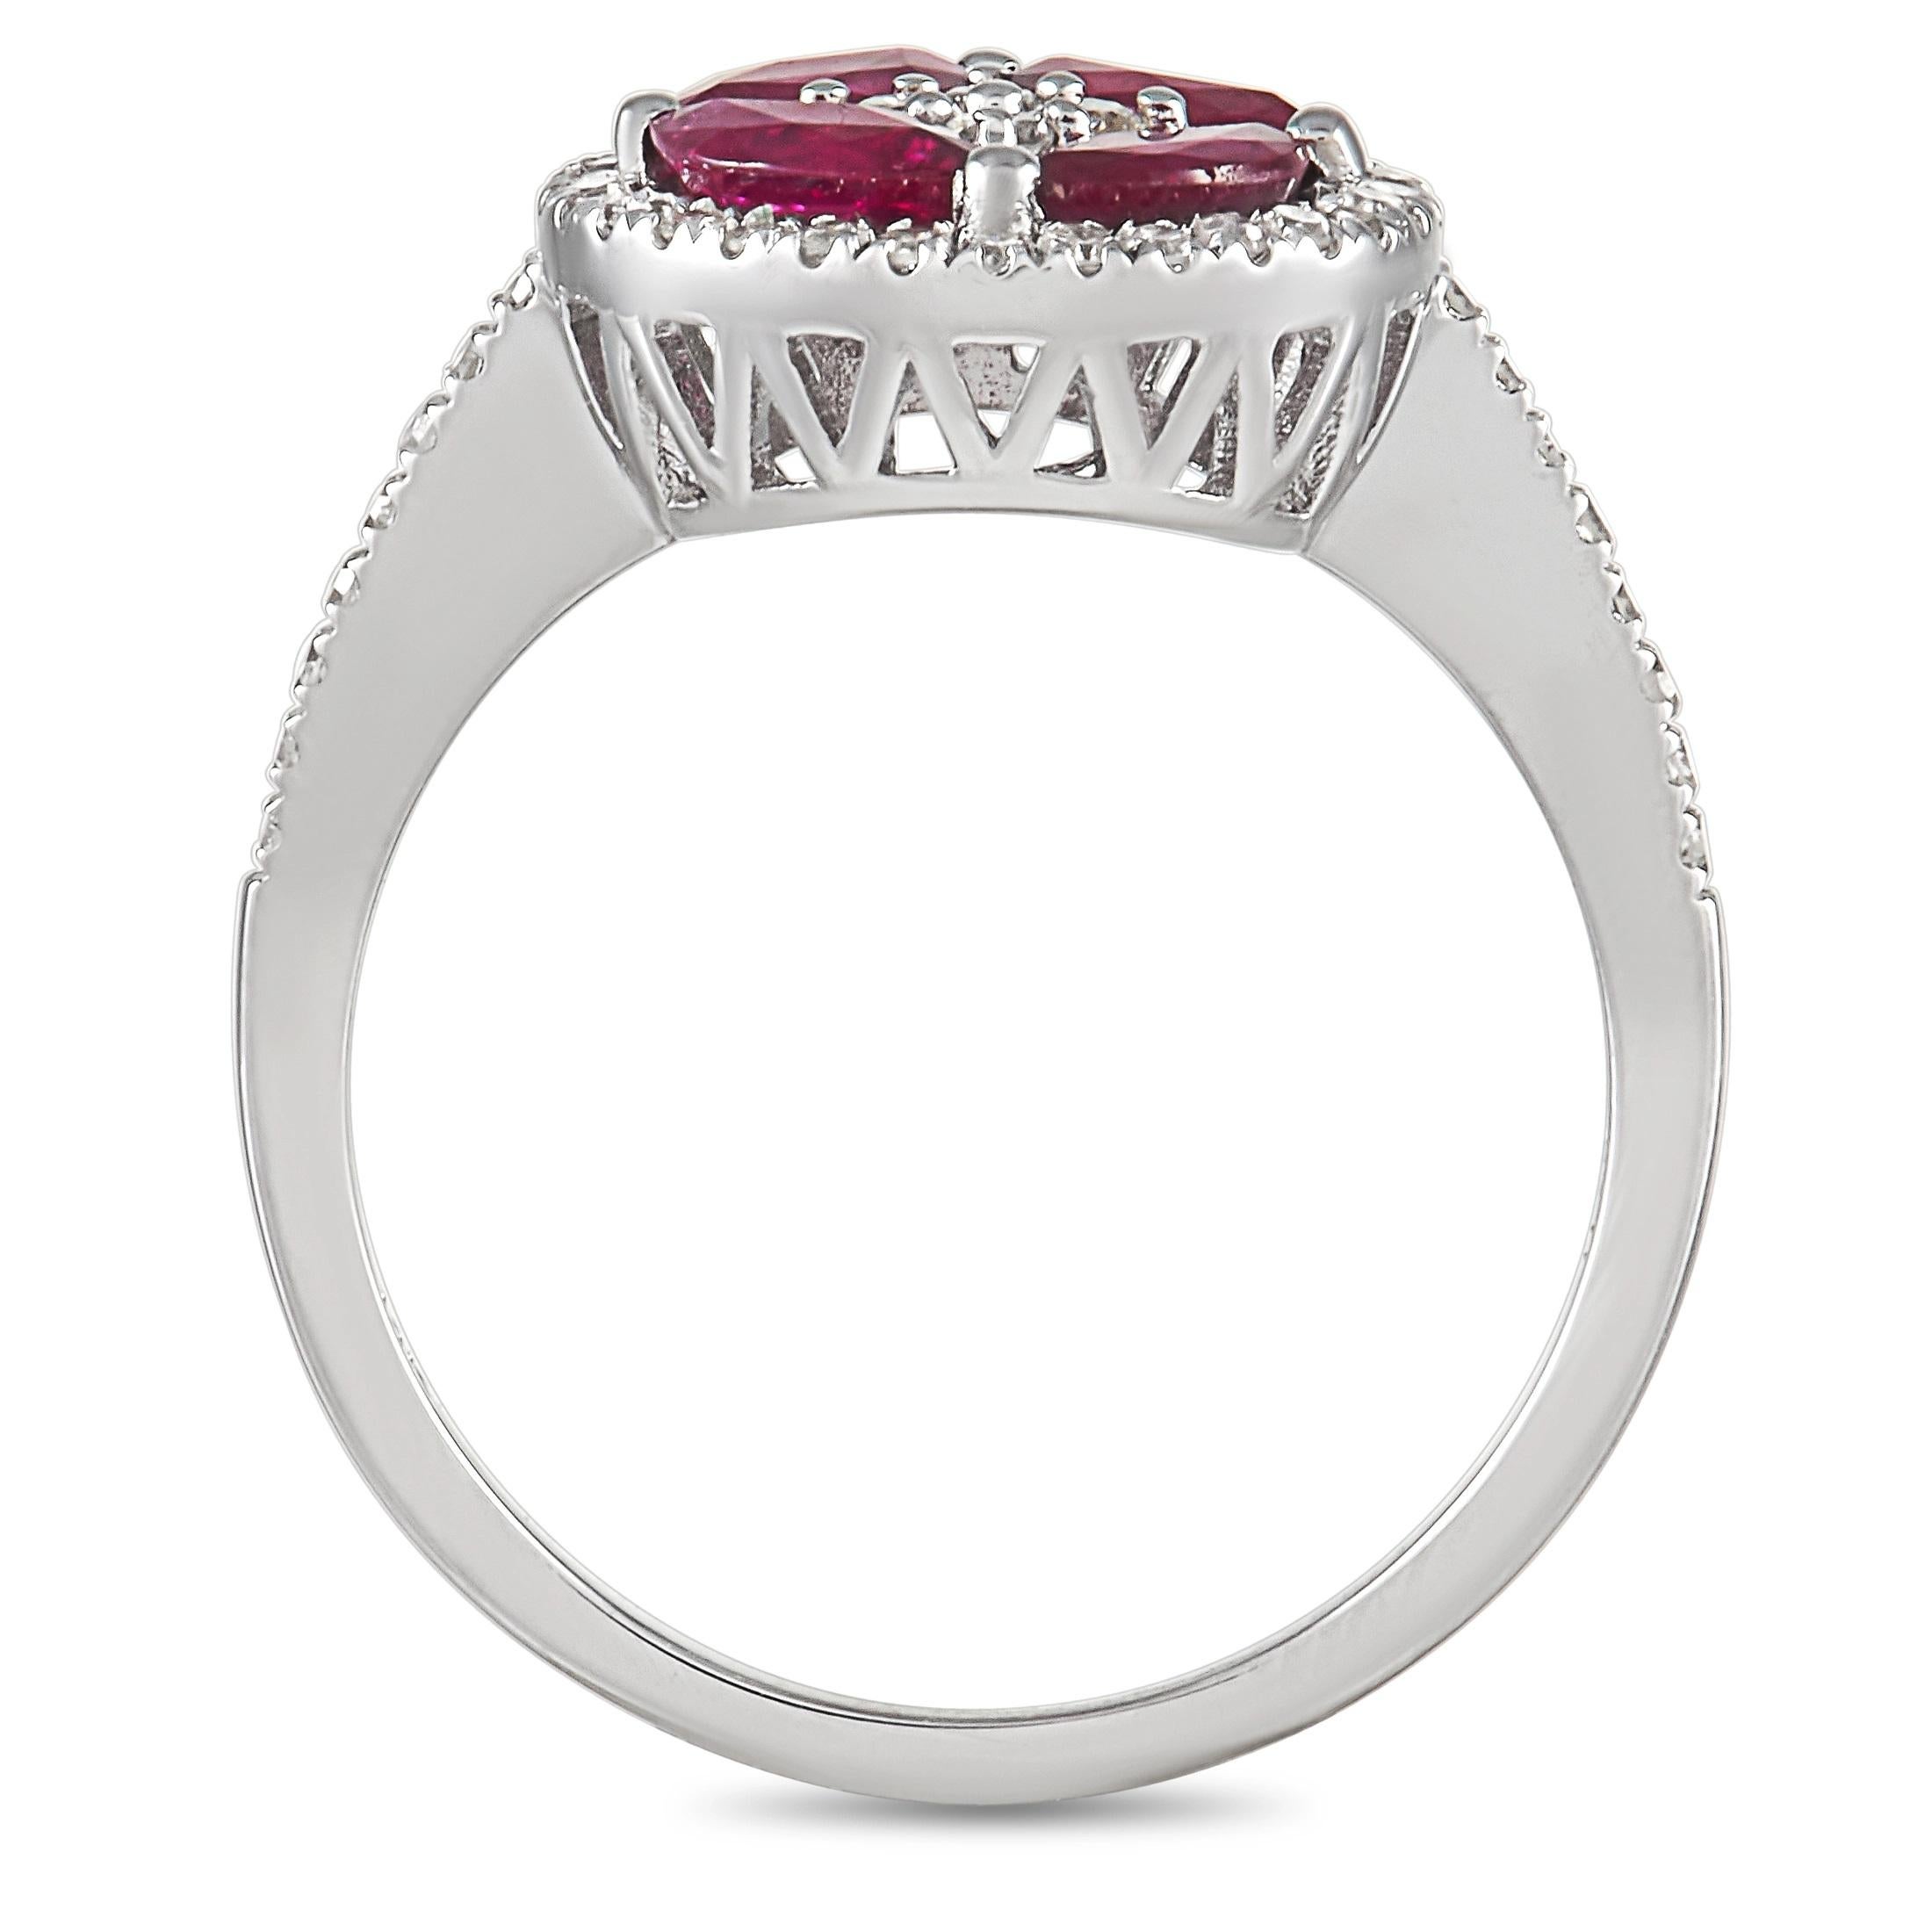 This radiant ring will sparkle and shine along with every move you make. A central cluster of rubies add color and dimension to this exciting style, which also includes diamonds with a total weight of 0.33 carats. It’s crafted from shimmering 14K